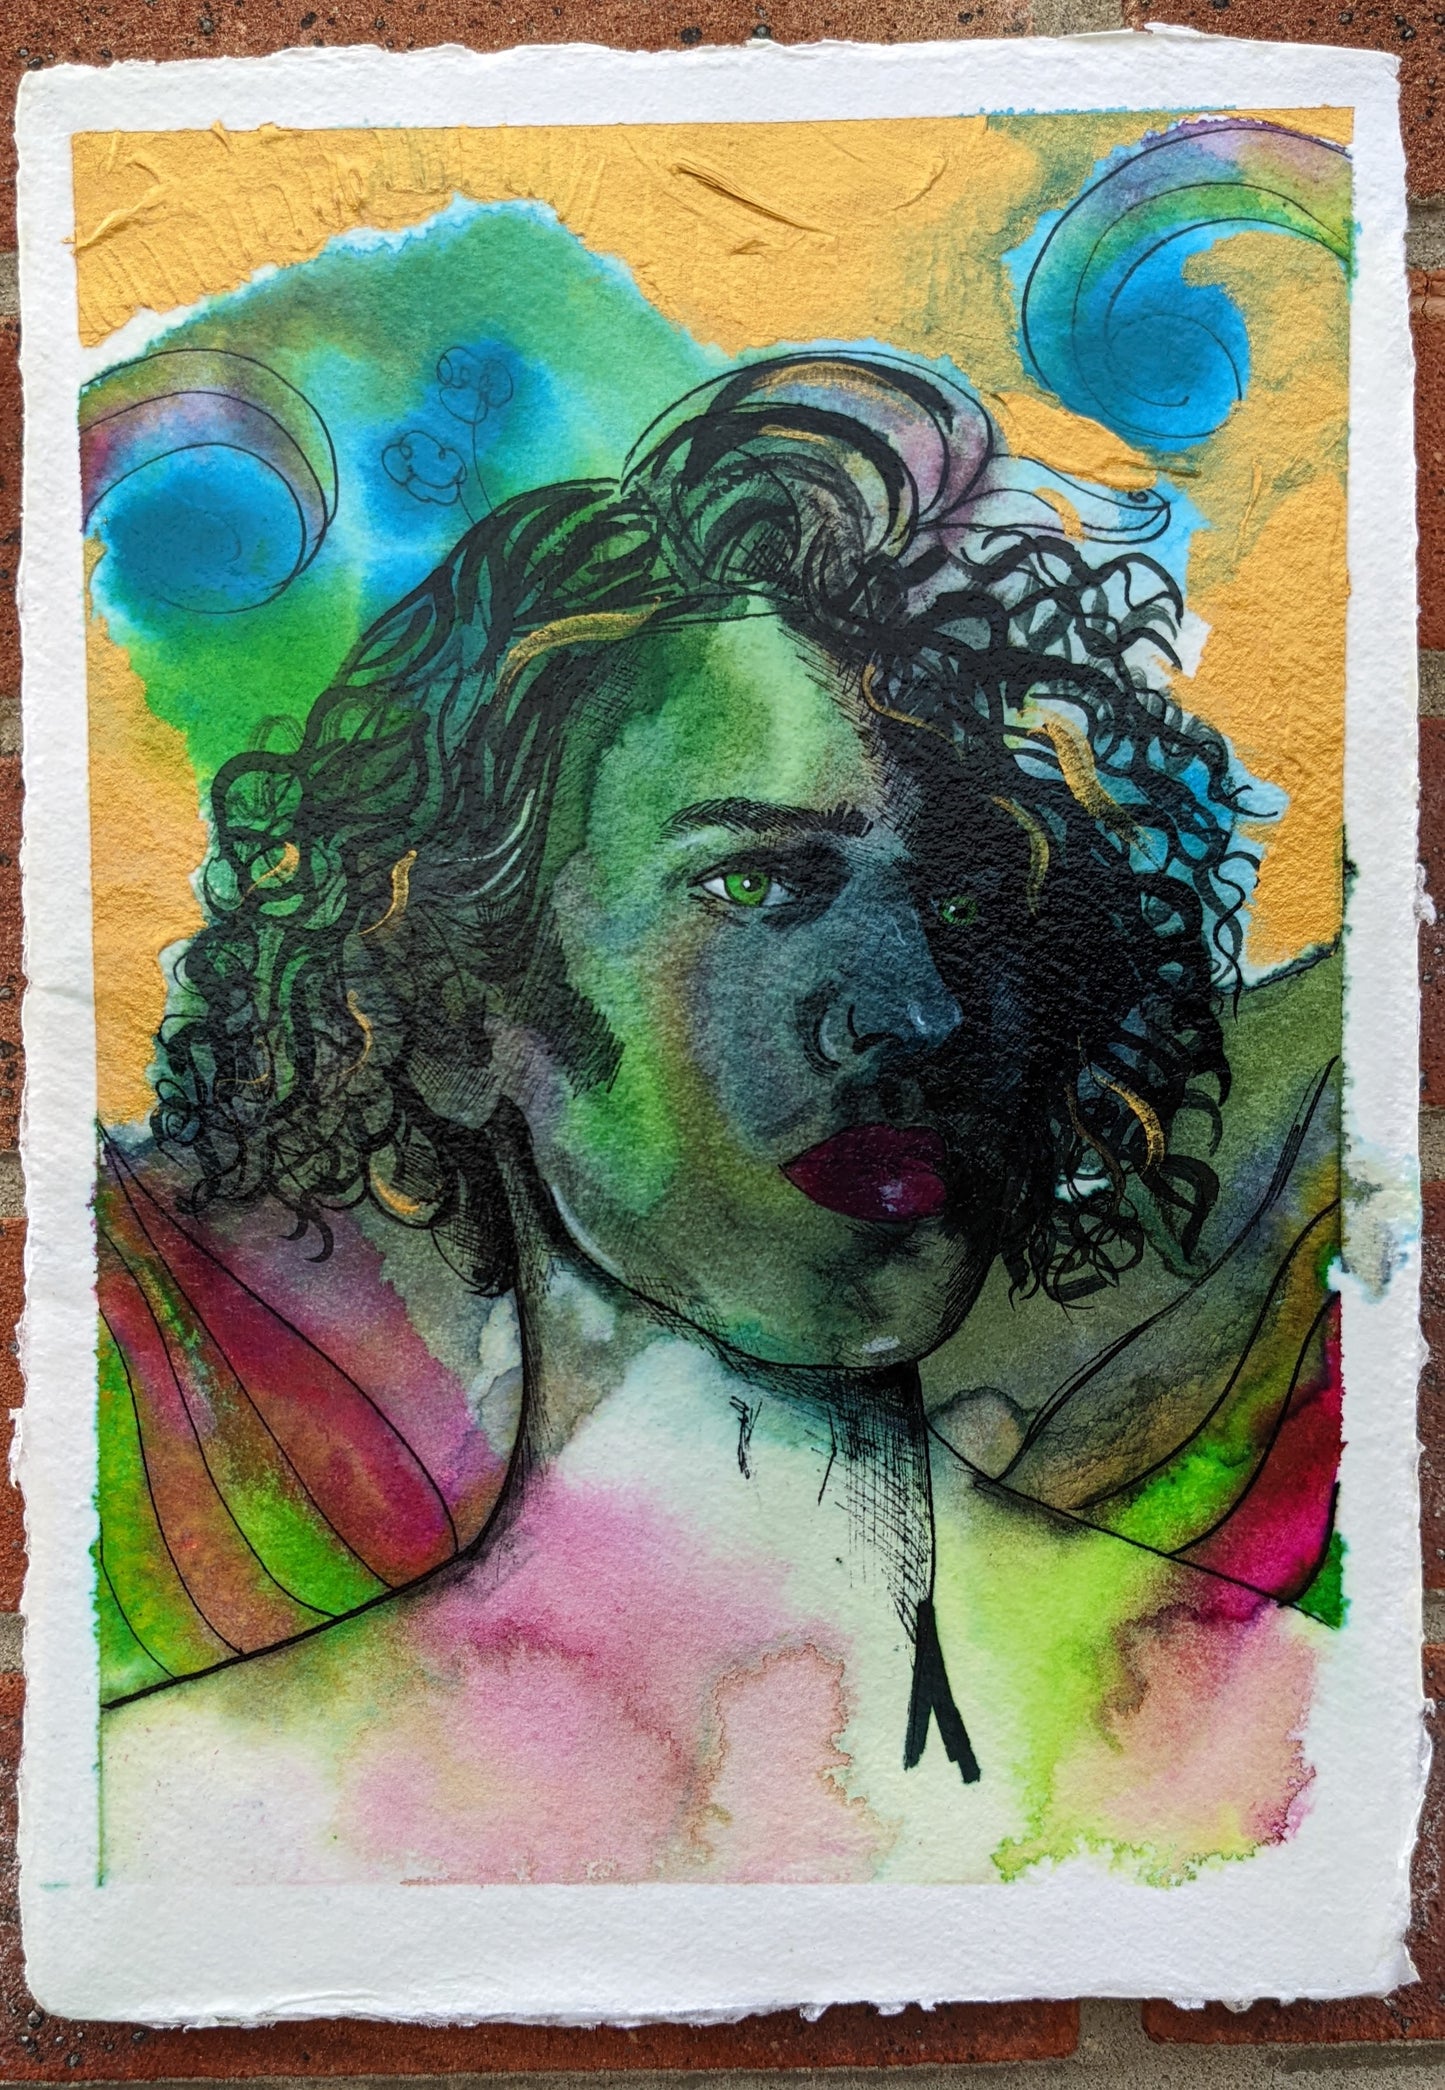 Eliot Waugh lookalike, the sort of feel you would get from the magicians character,An original painting of the fairy king, oberon, from a Midsummer nights dream, created by British female artist Dianne Bowell. created in inks and acrylic paints.